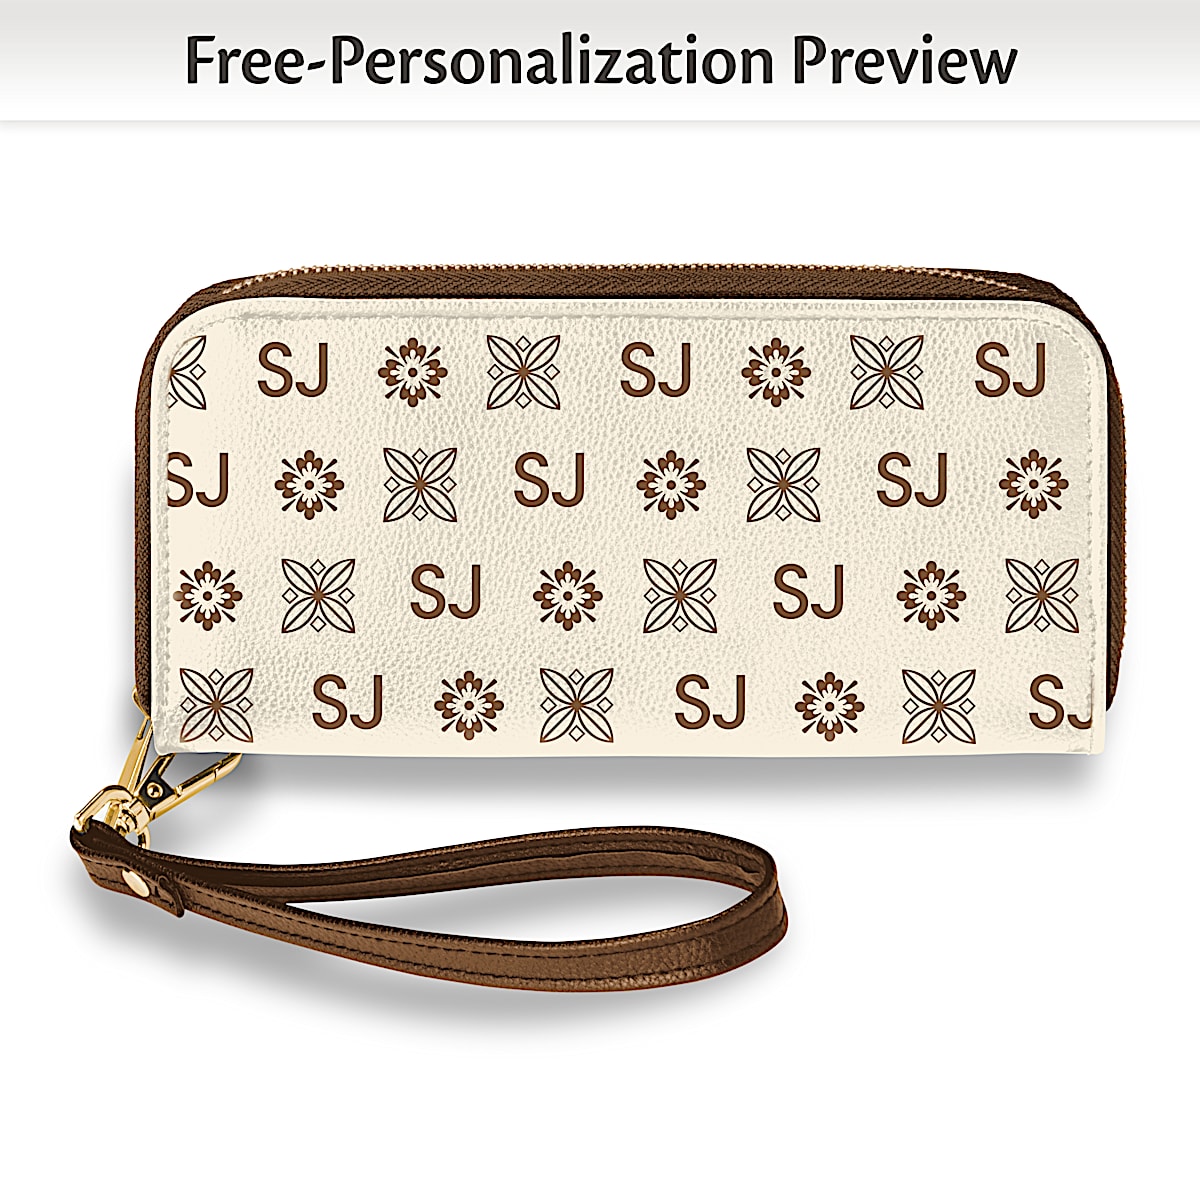 Just My Style Beige Faux Leather Wallet Featuring An All-Over Pattern That Incorporates 2 Personalized initials of Your Choice with Wristlet Strap 